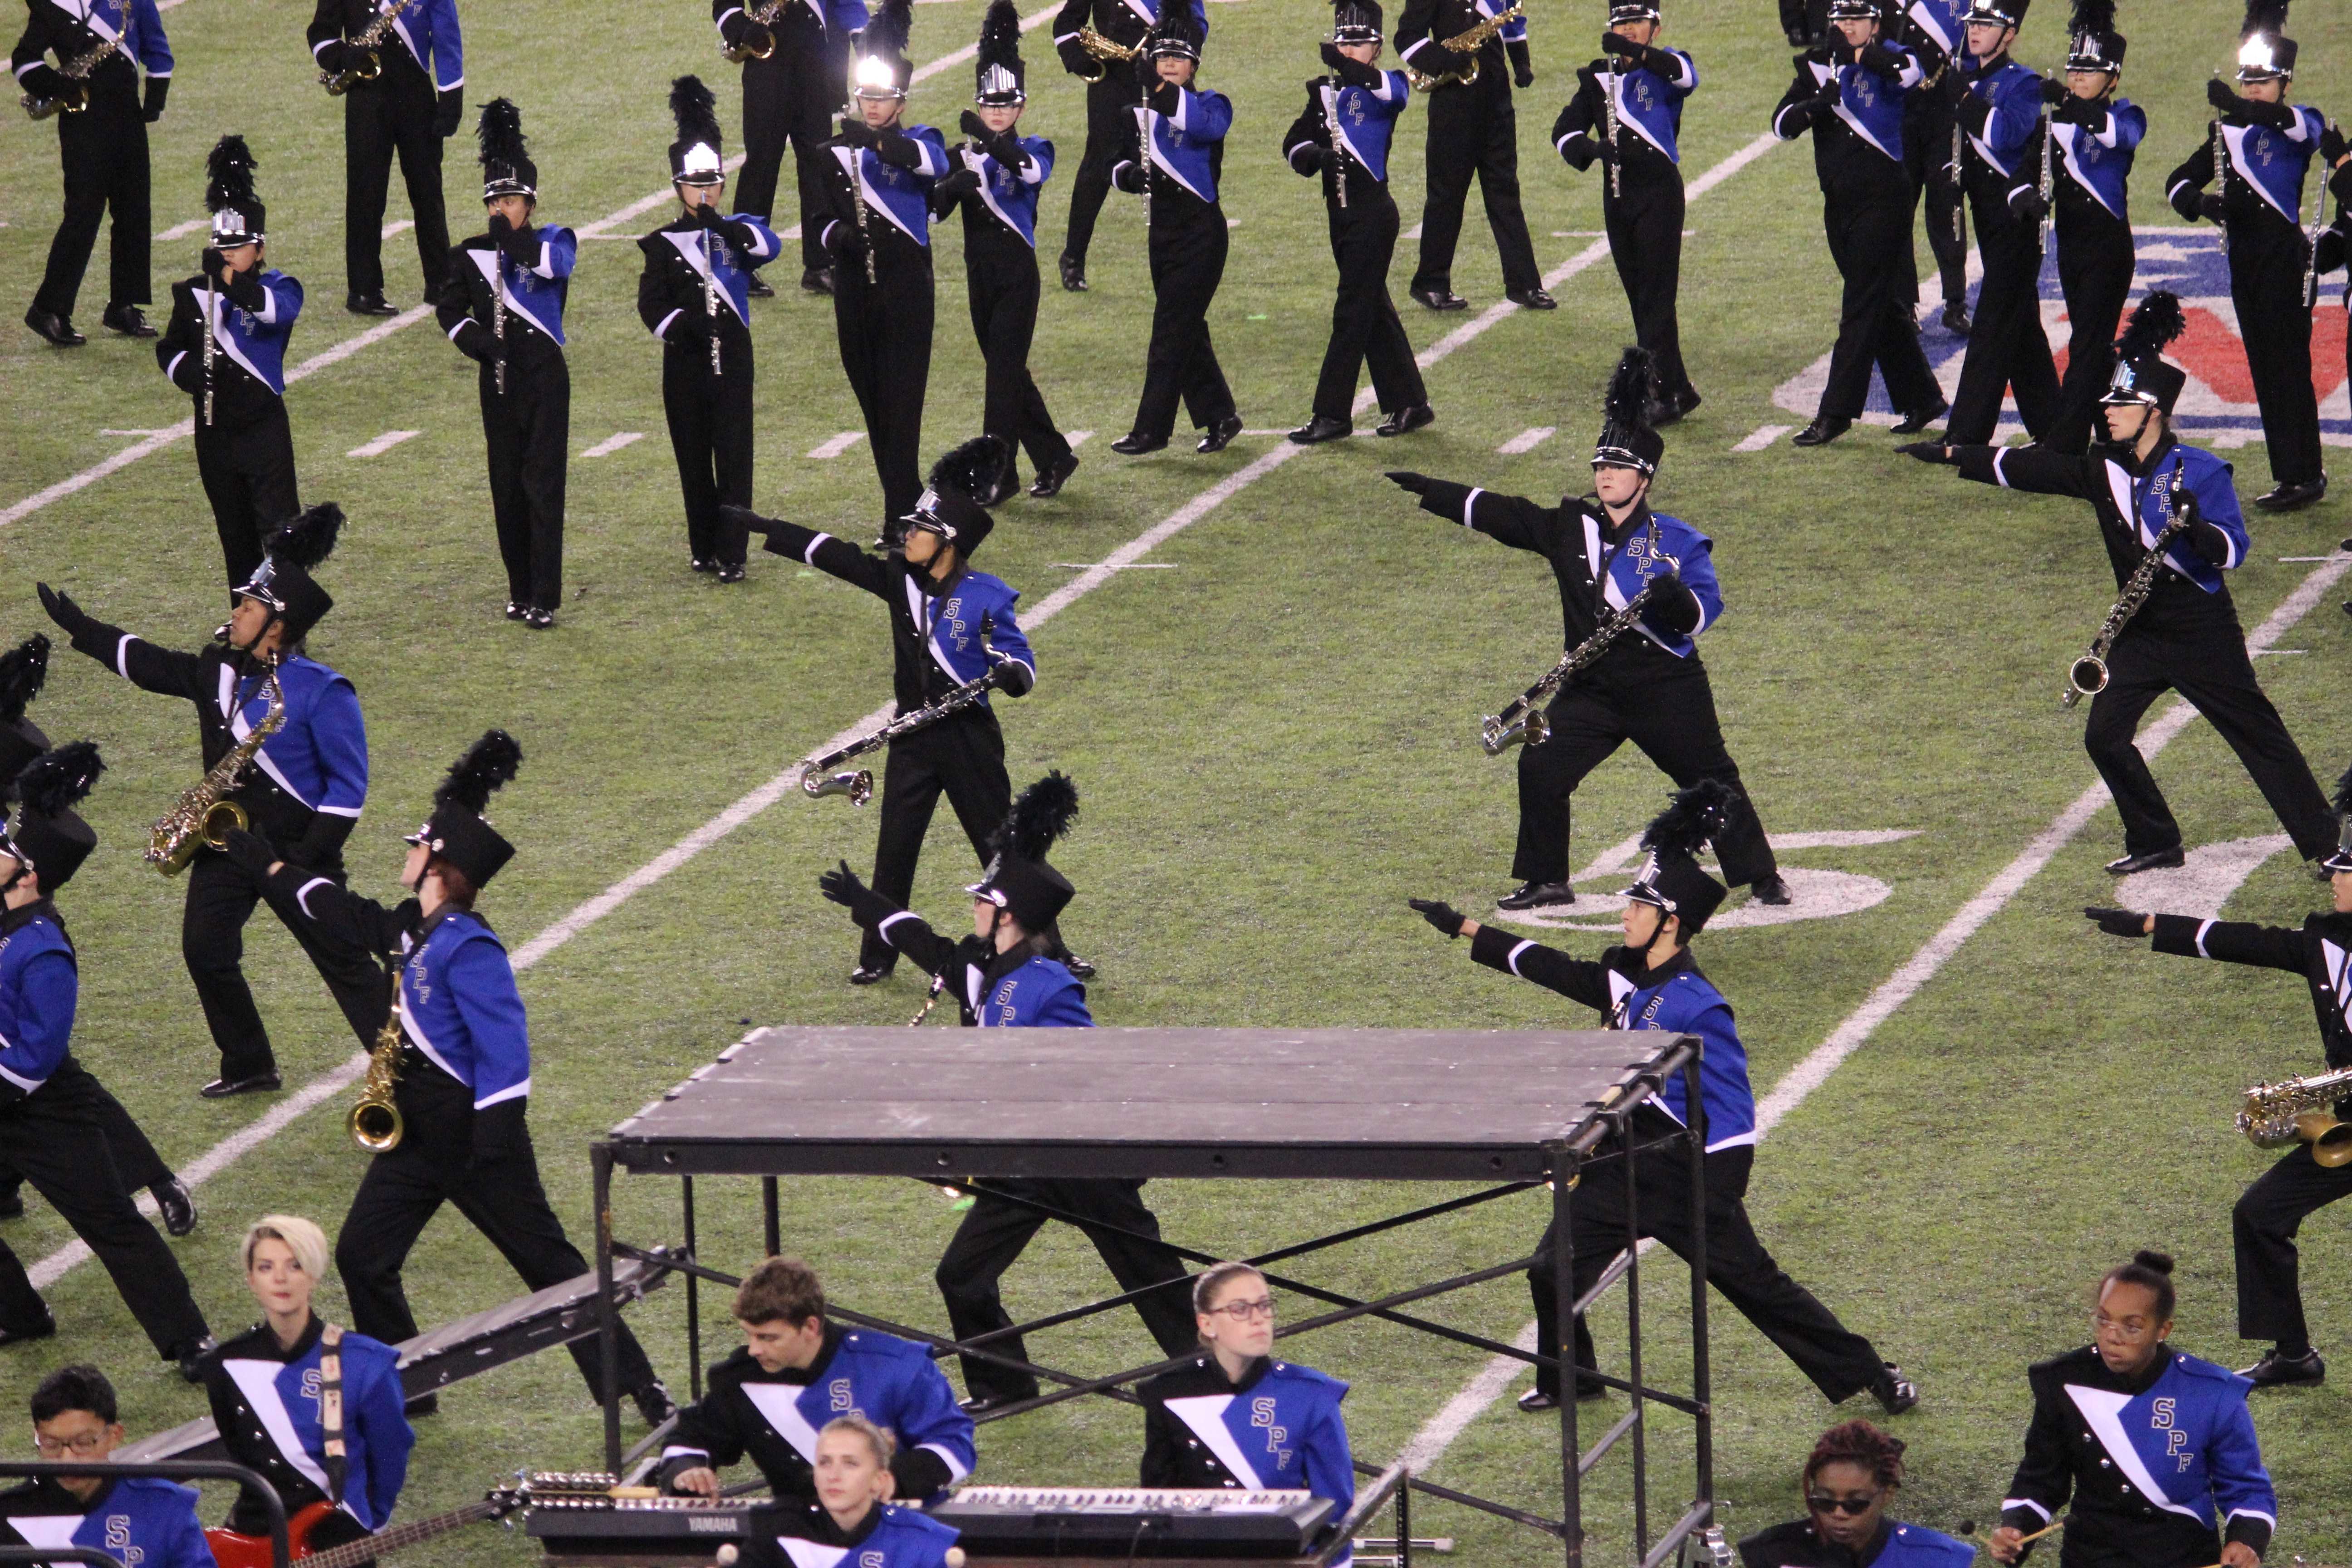 Marching Band Concludes Season With HighEnergy Performance at Metlife